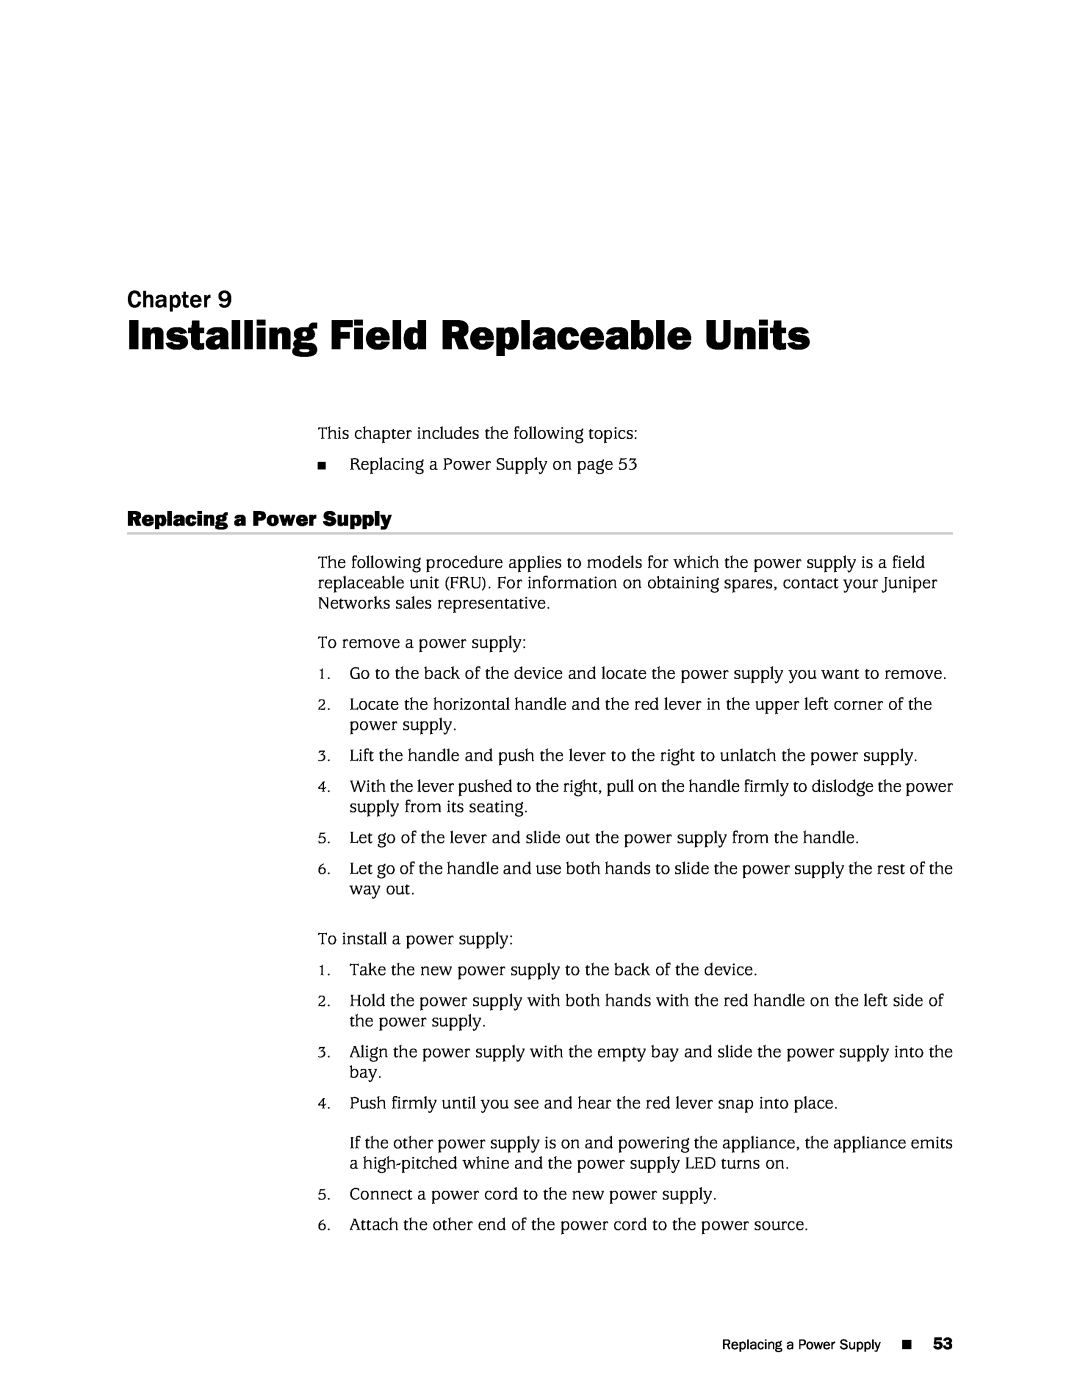 Juniper Networks IDP250 manual Installing Field Replaceable Units, Replacing a Power Supply, Chapter 